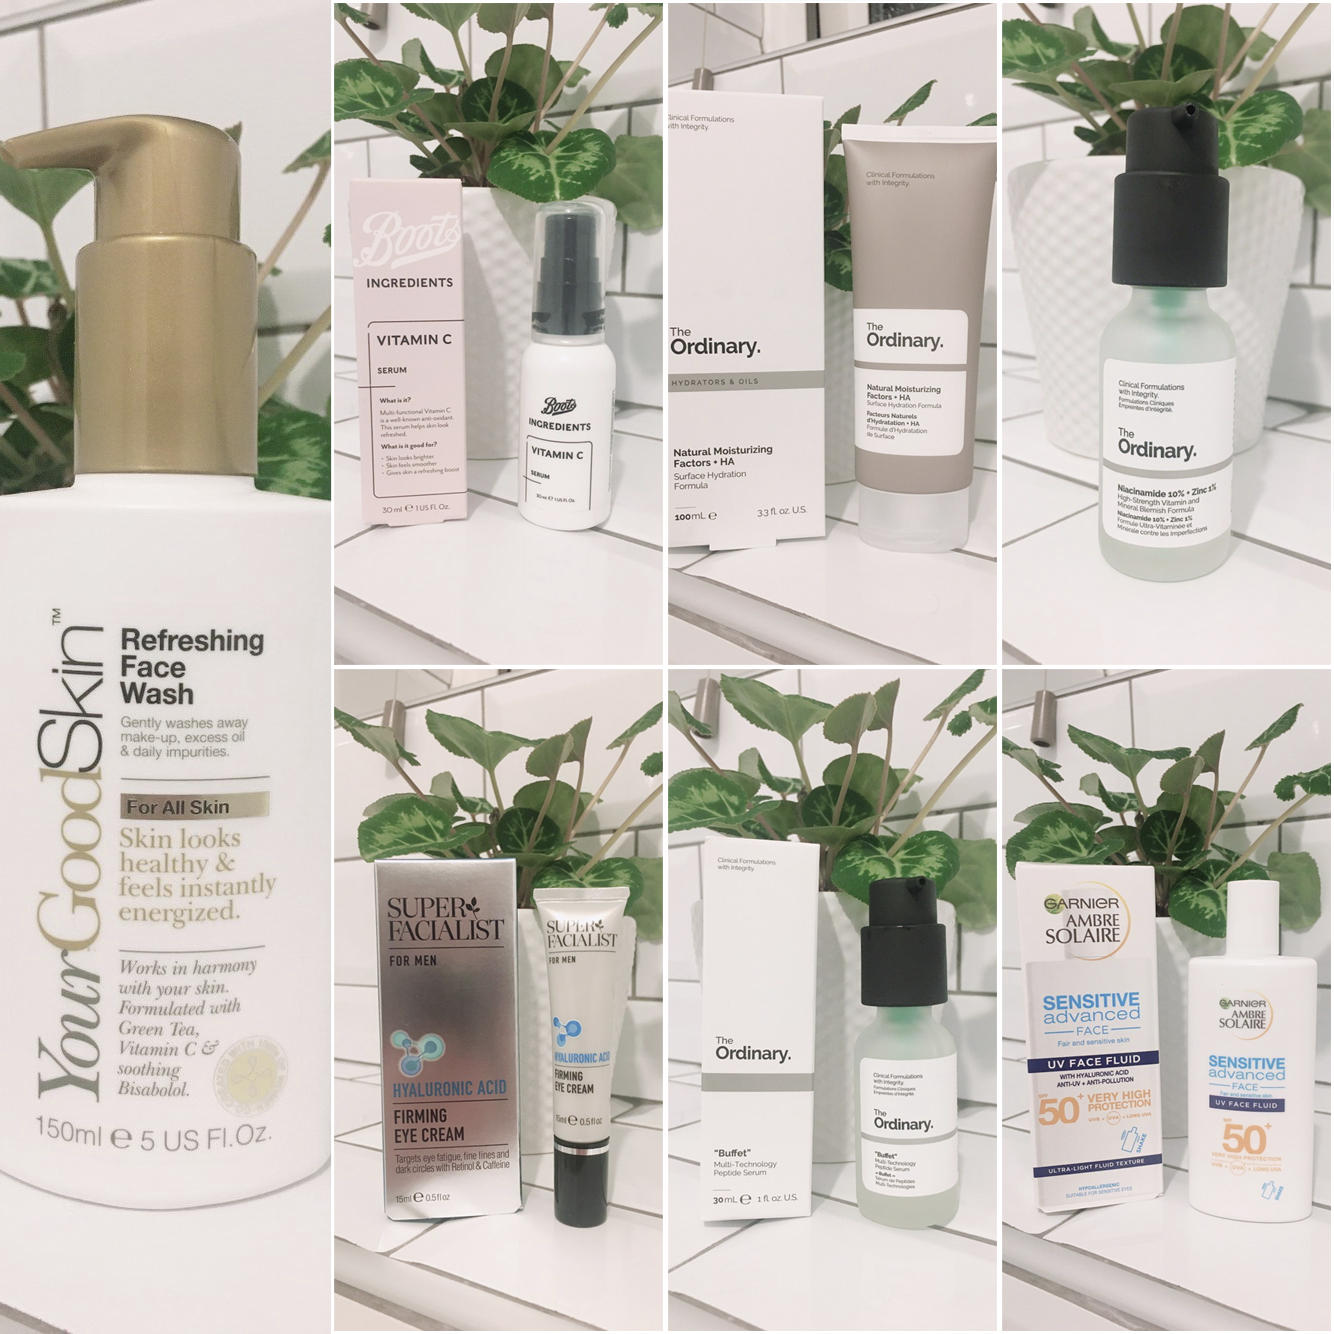 YourGoodSkin Refreshing Face Wash Boots Ingredients Vitamin C Serum The Ordinary Niacinamide Serum / The Ordinary Buffet Serum SuperFacialist for Men Hyaluronic Acid Firming Eye Cream The Ordinary Natural Moisturising Factors Garnier Ambre Solaire Sensitive Advanced UV Face Fluid SPF50